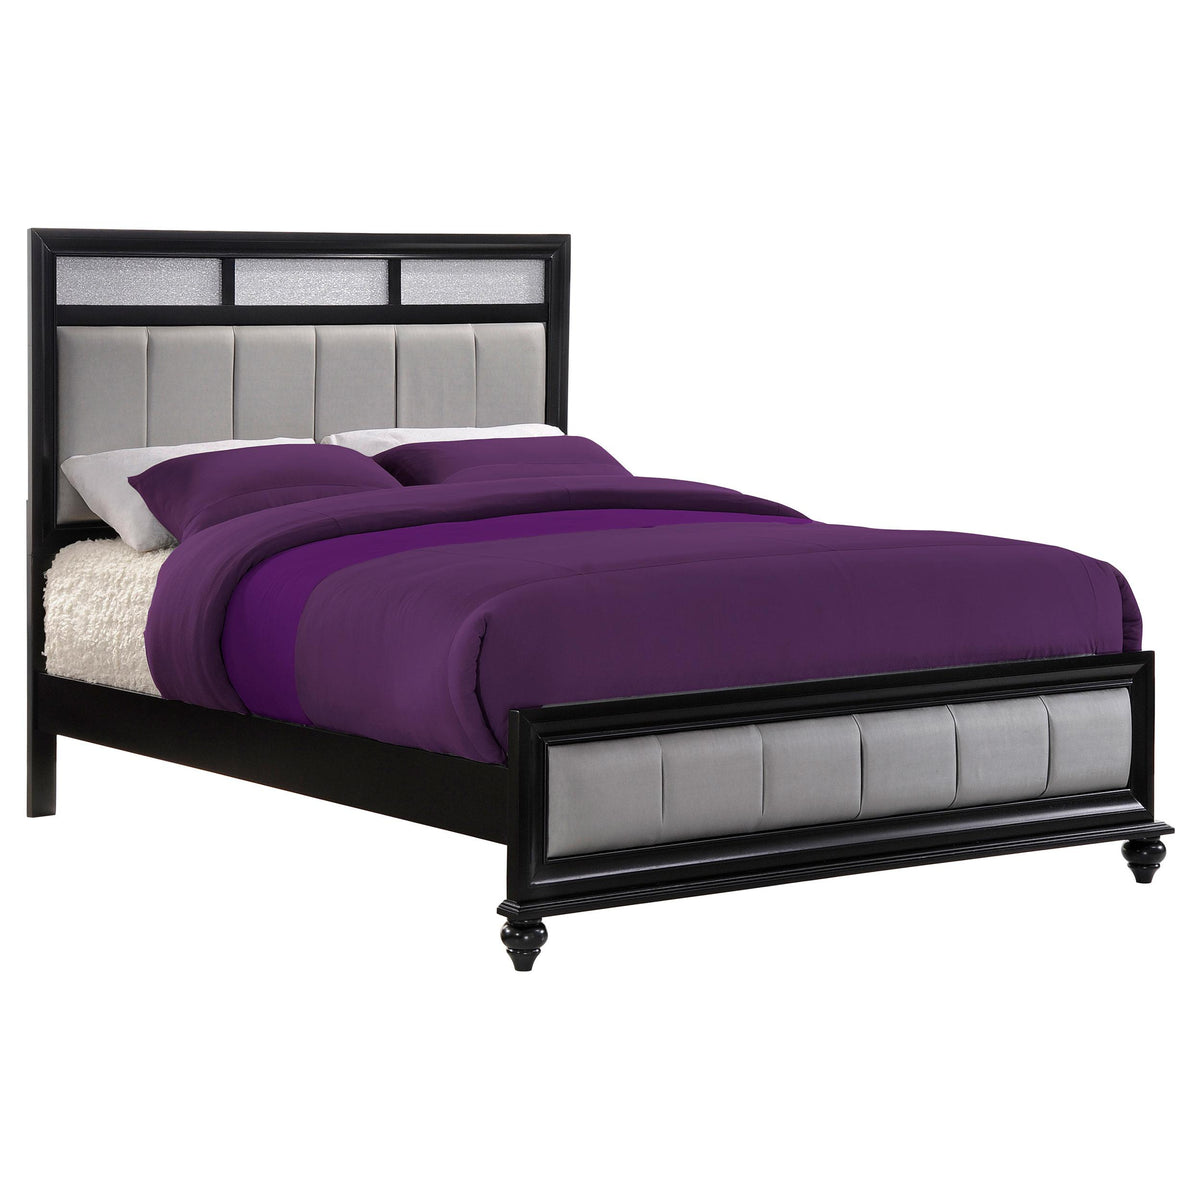 Barzini Queen Upholstered Bed Black and Grey Barzini Queen Upholstered Bed Black and Grey Half Price Furniture